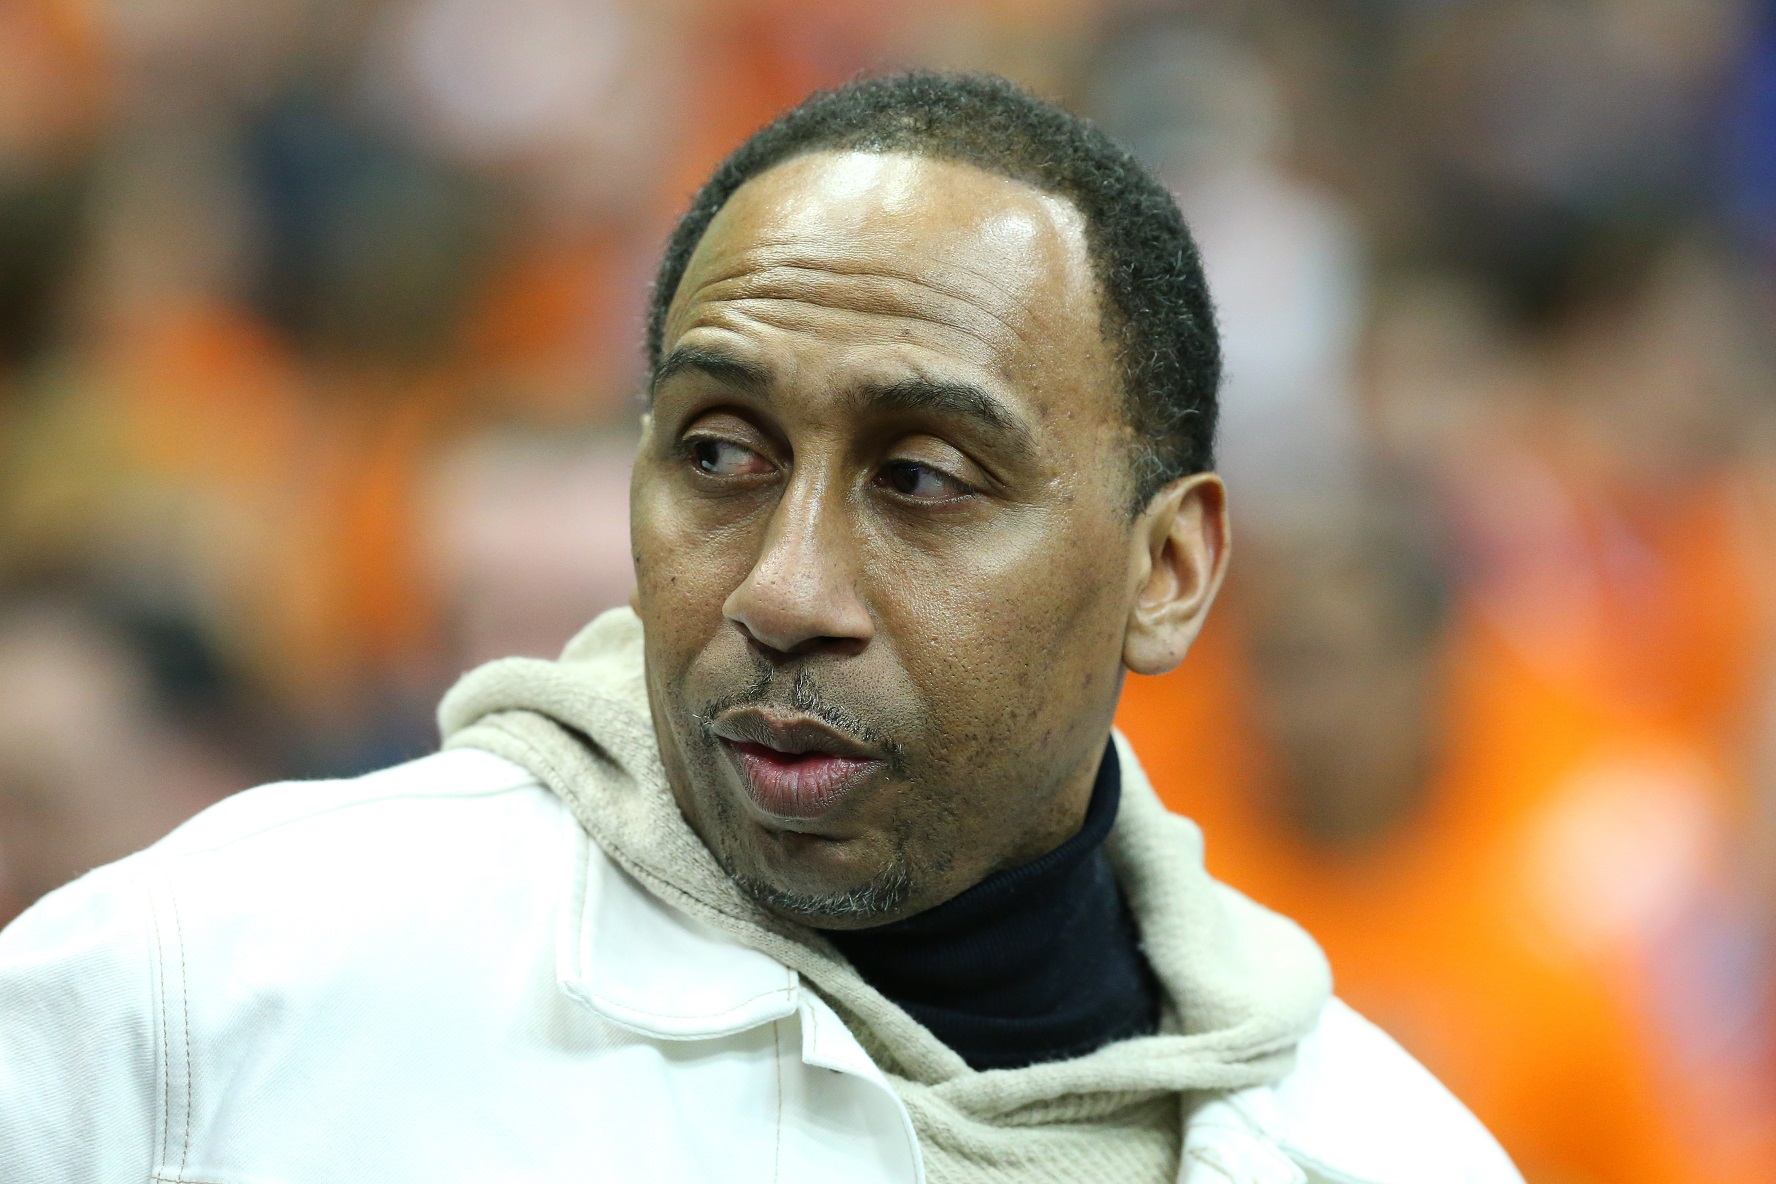 Stephen A. Smith’s Lack of Conviction Embarrasses Him and ESPN